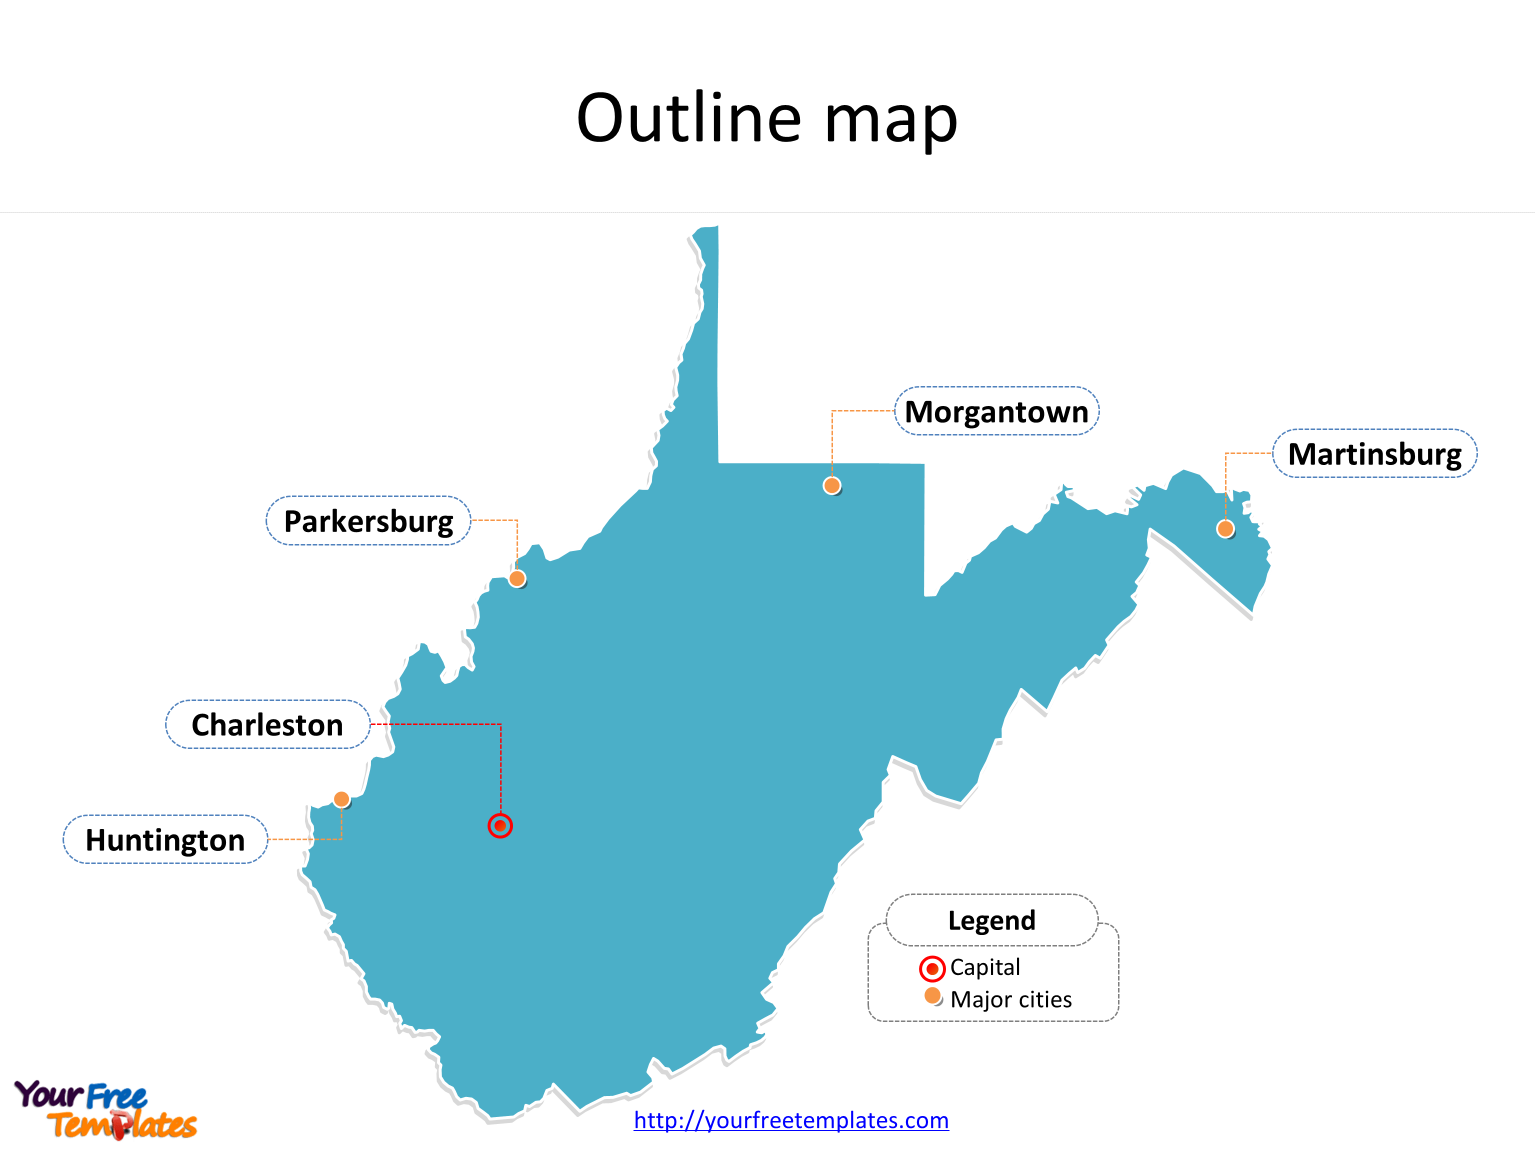 State of West Virginia map with outline and cities labeled on the West Virginia maps PowerPoint templates